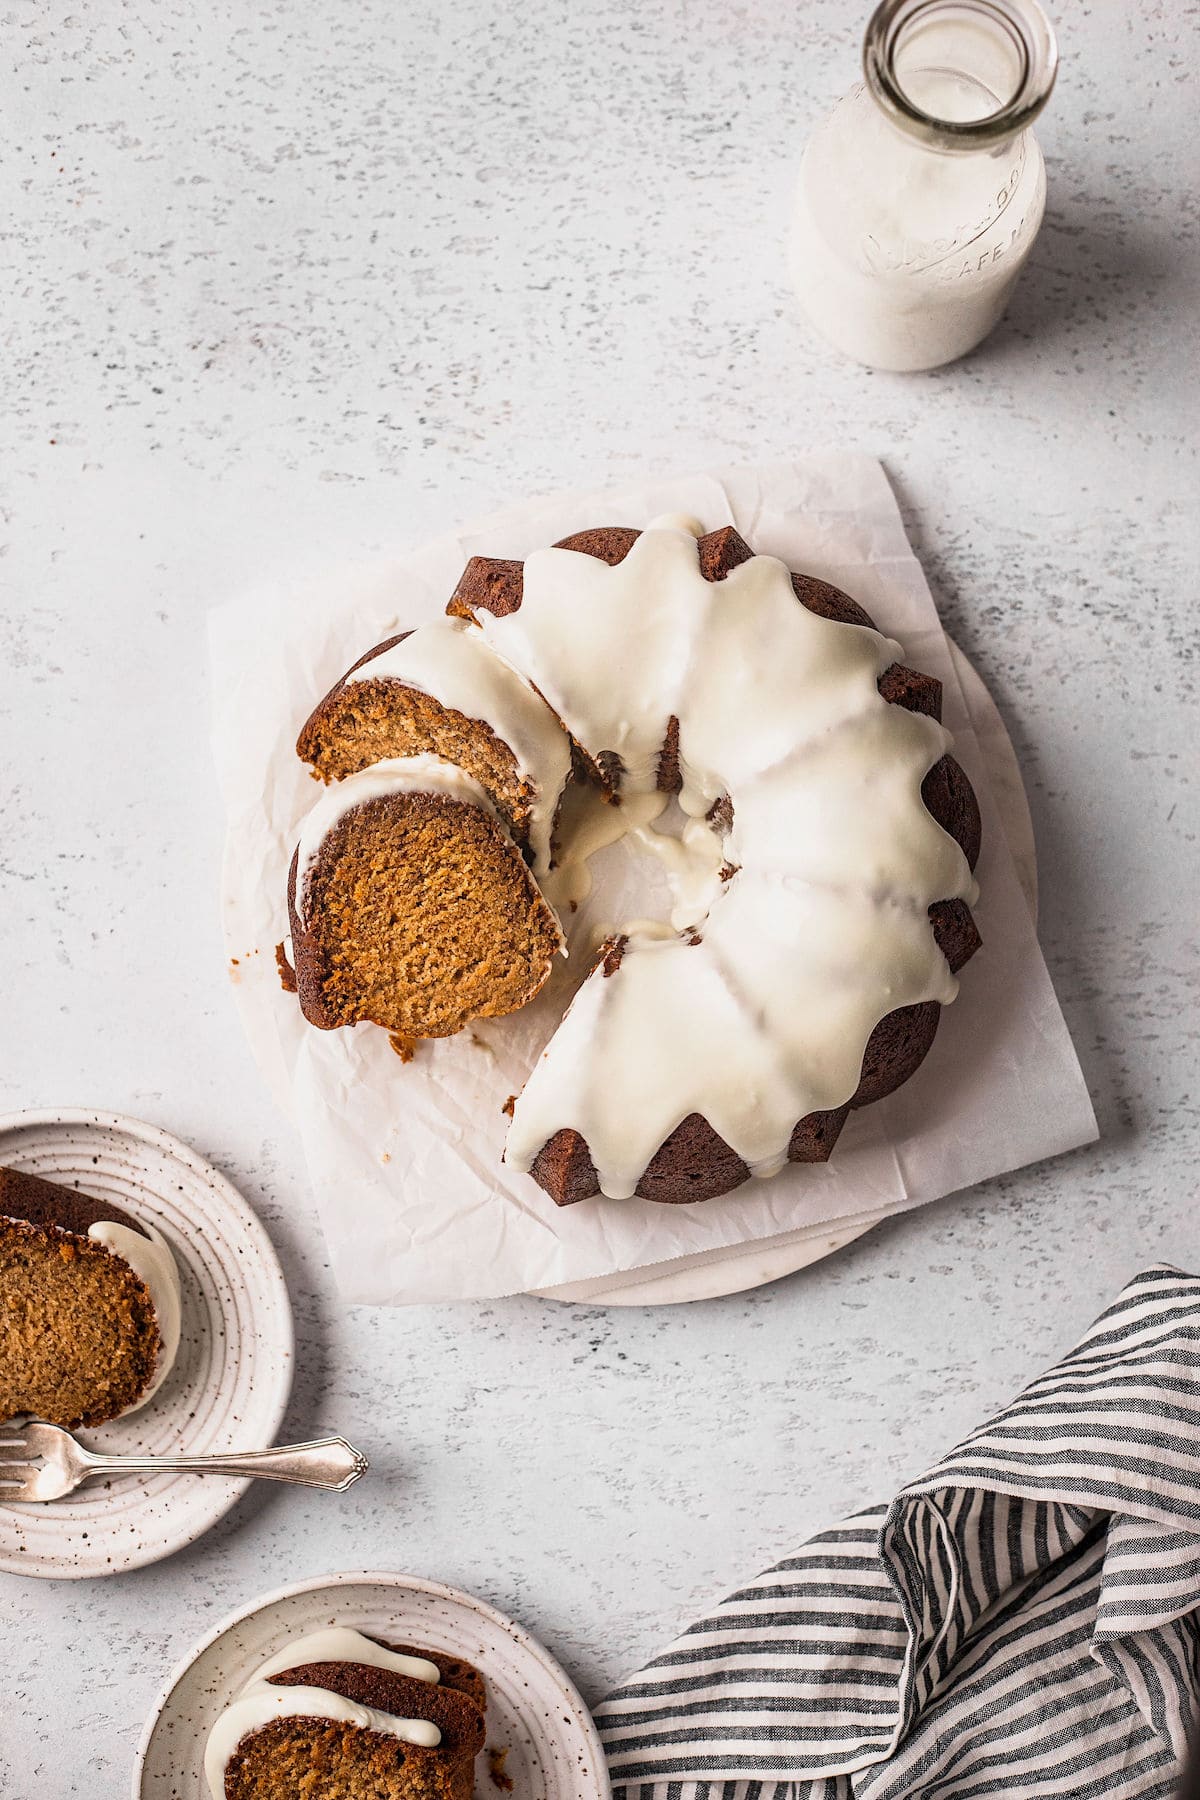 That Old Bundt Pan Will Make the Perfect Tabletop Flower Pot